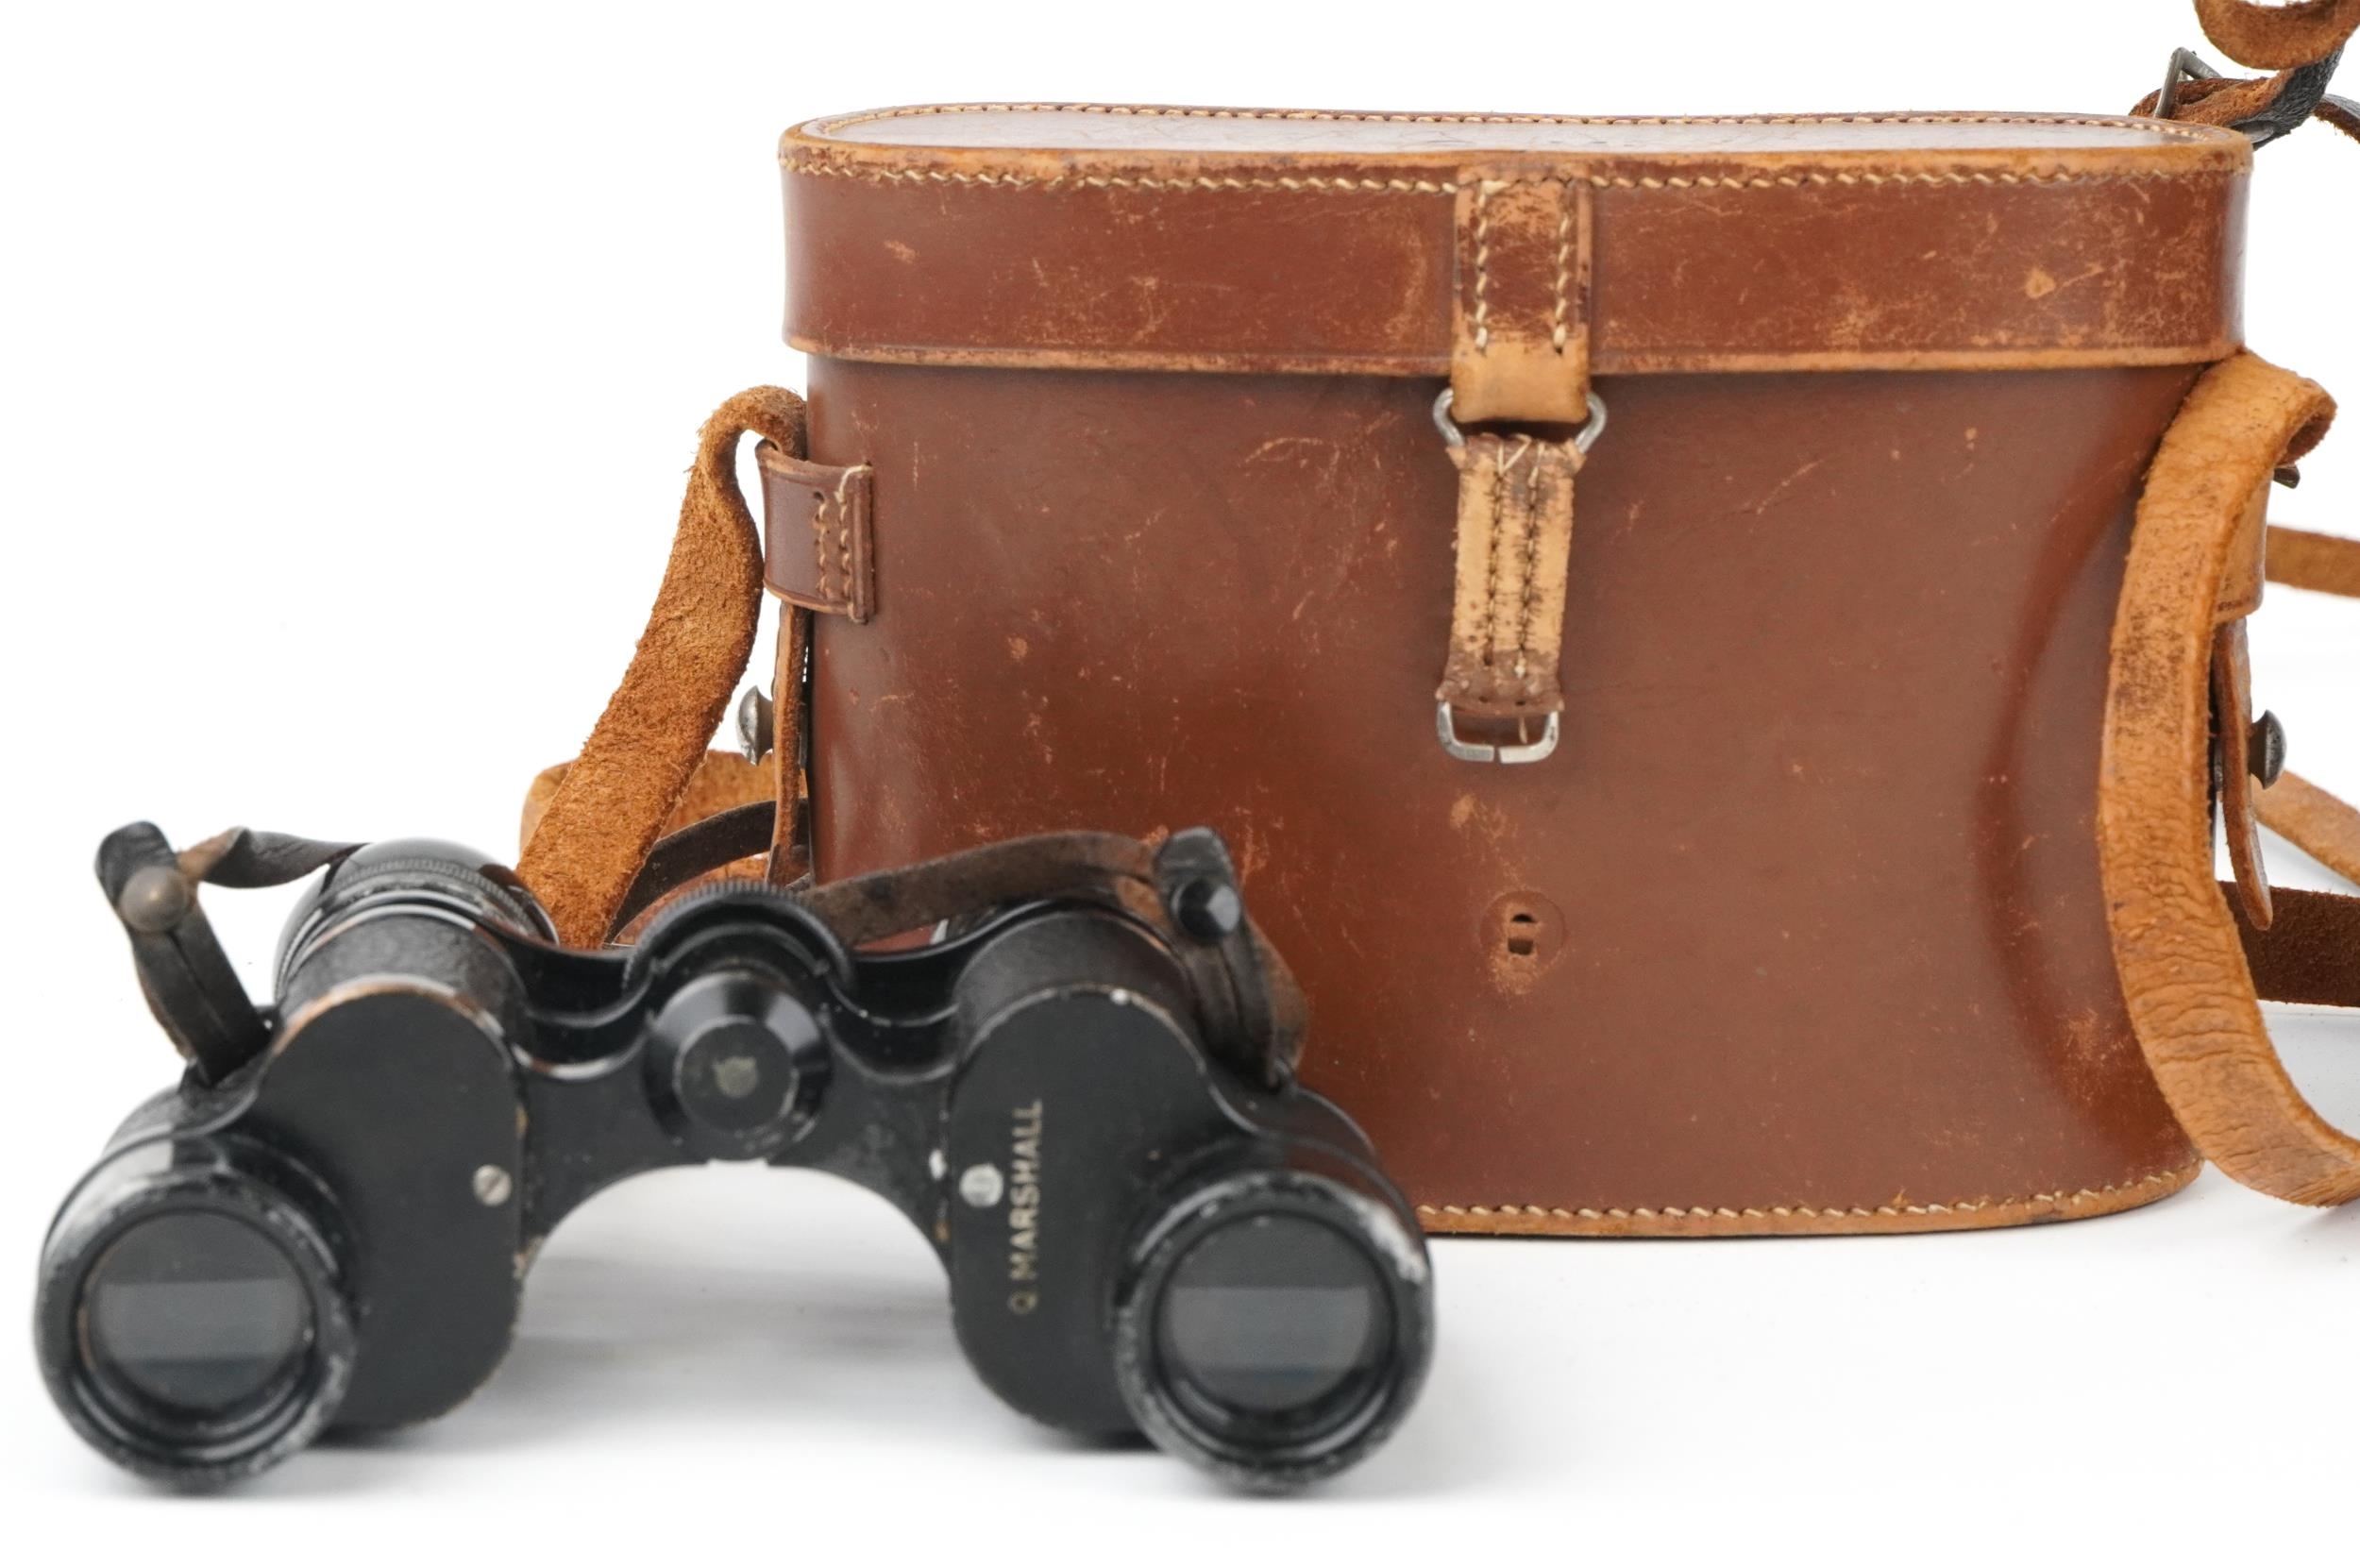 Cameras and binoculars with cases comprising Carl Zeiss Jena Sportur 6 x 24, Pentax Asahi K 1000 and - Image 2 of 3